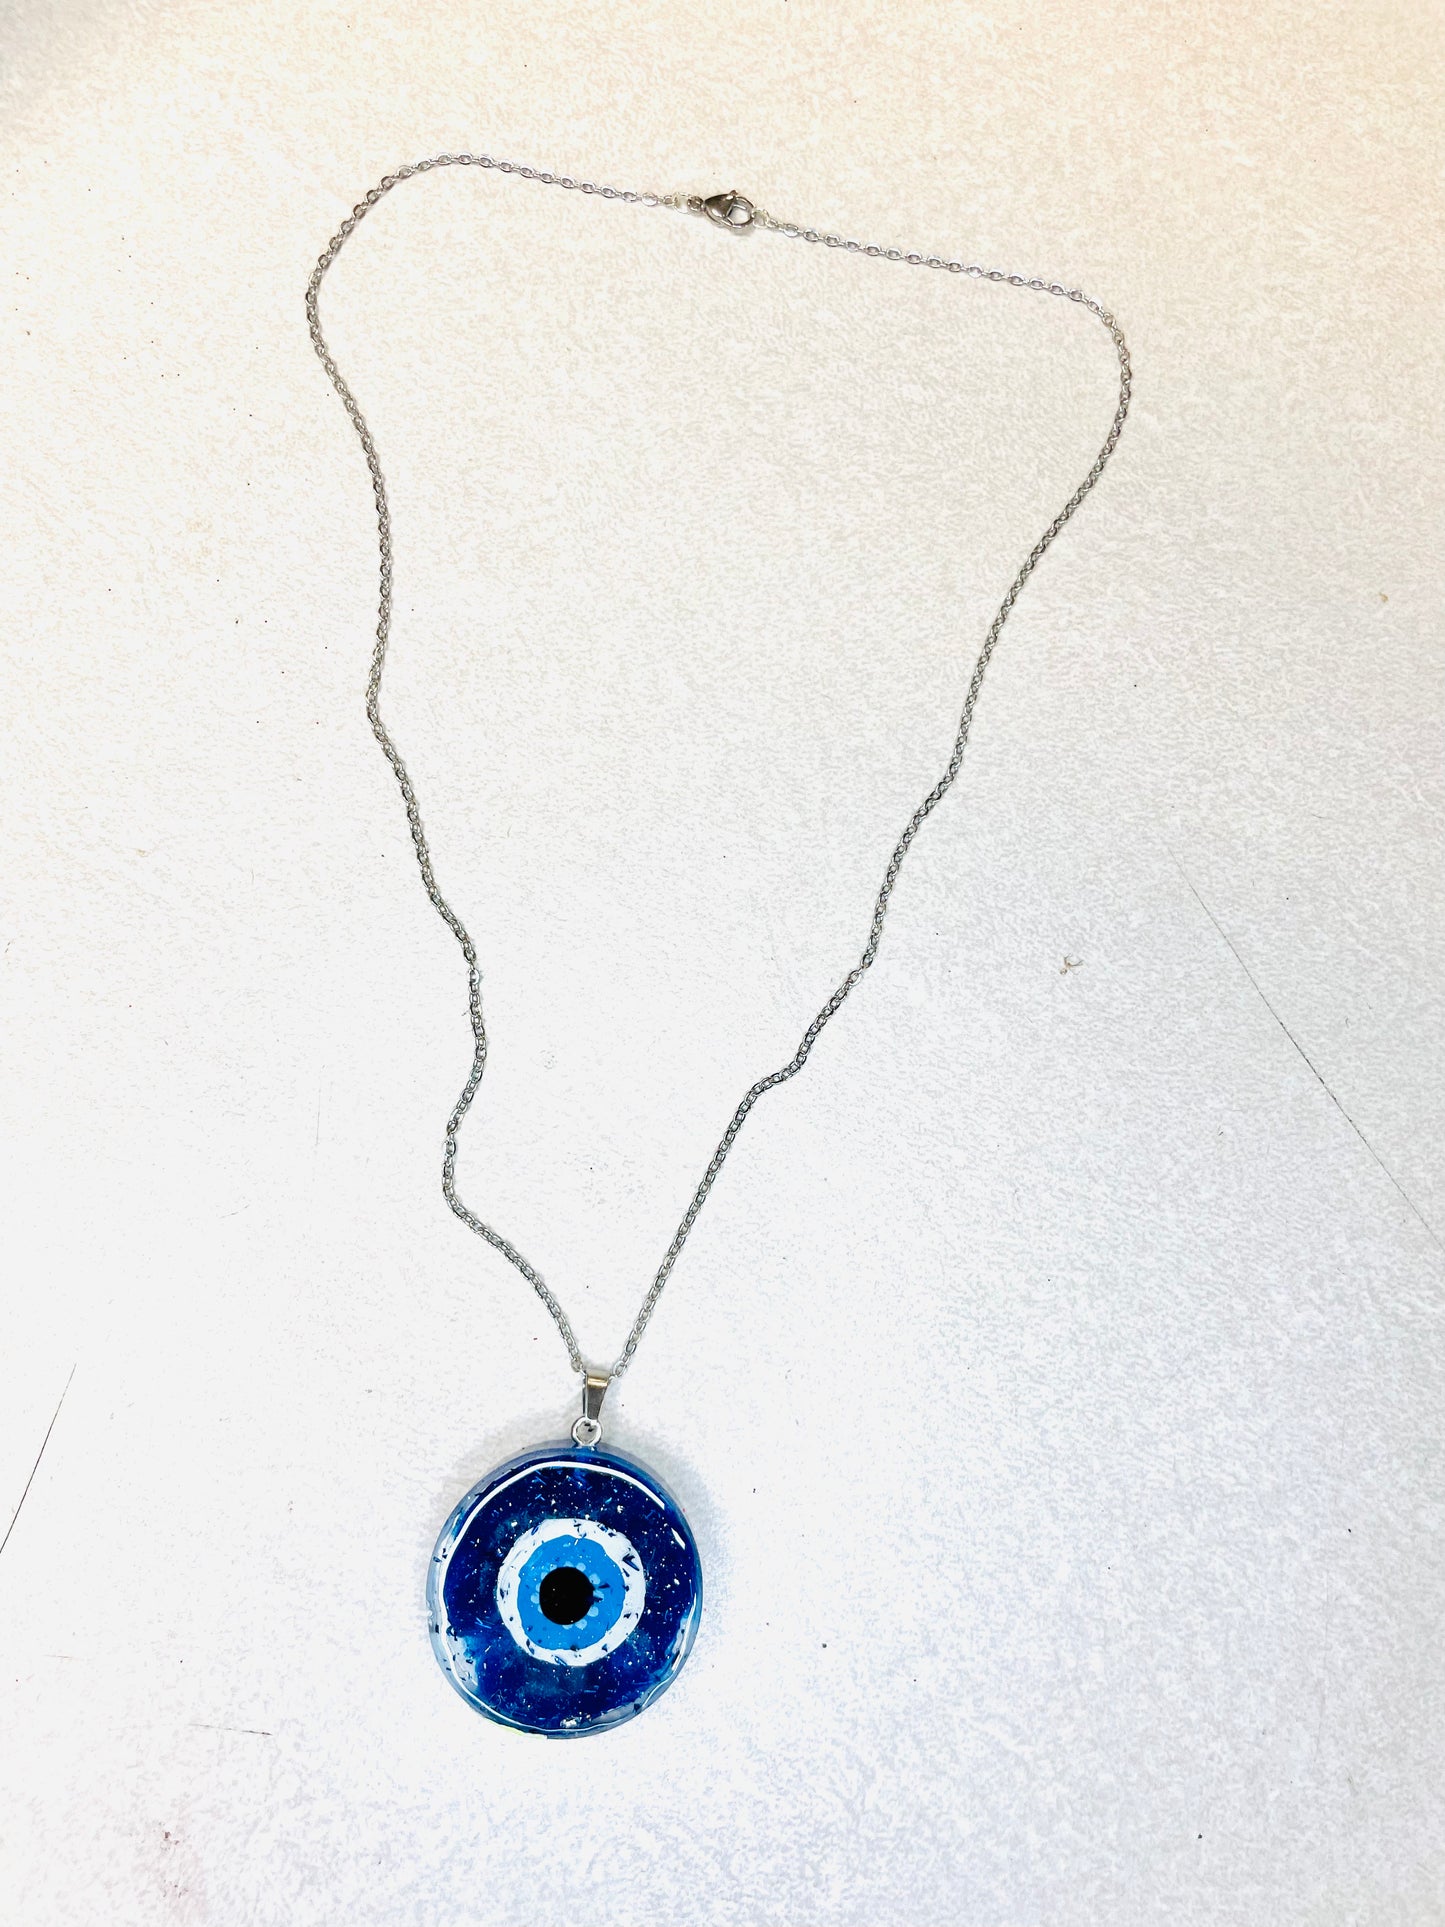 Resin Glitter Evil Eye Protection Necklace Amulet, Silver Stainless Steel Chain, Blue Glitter + Free One-Time Chain Repair